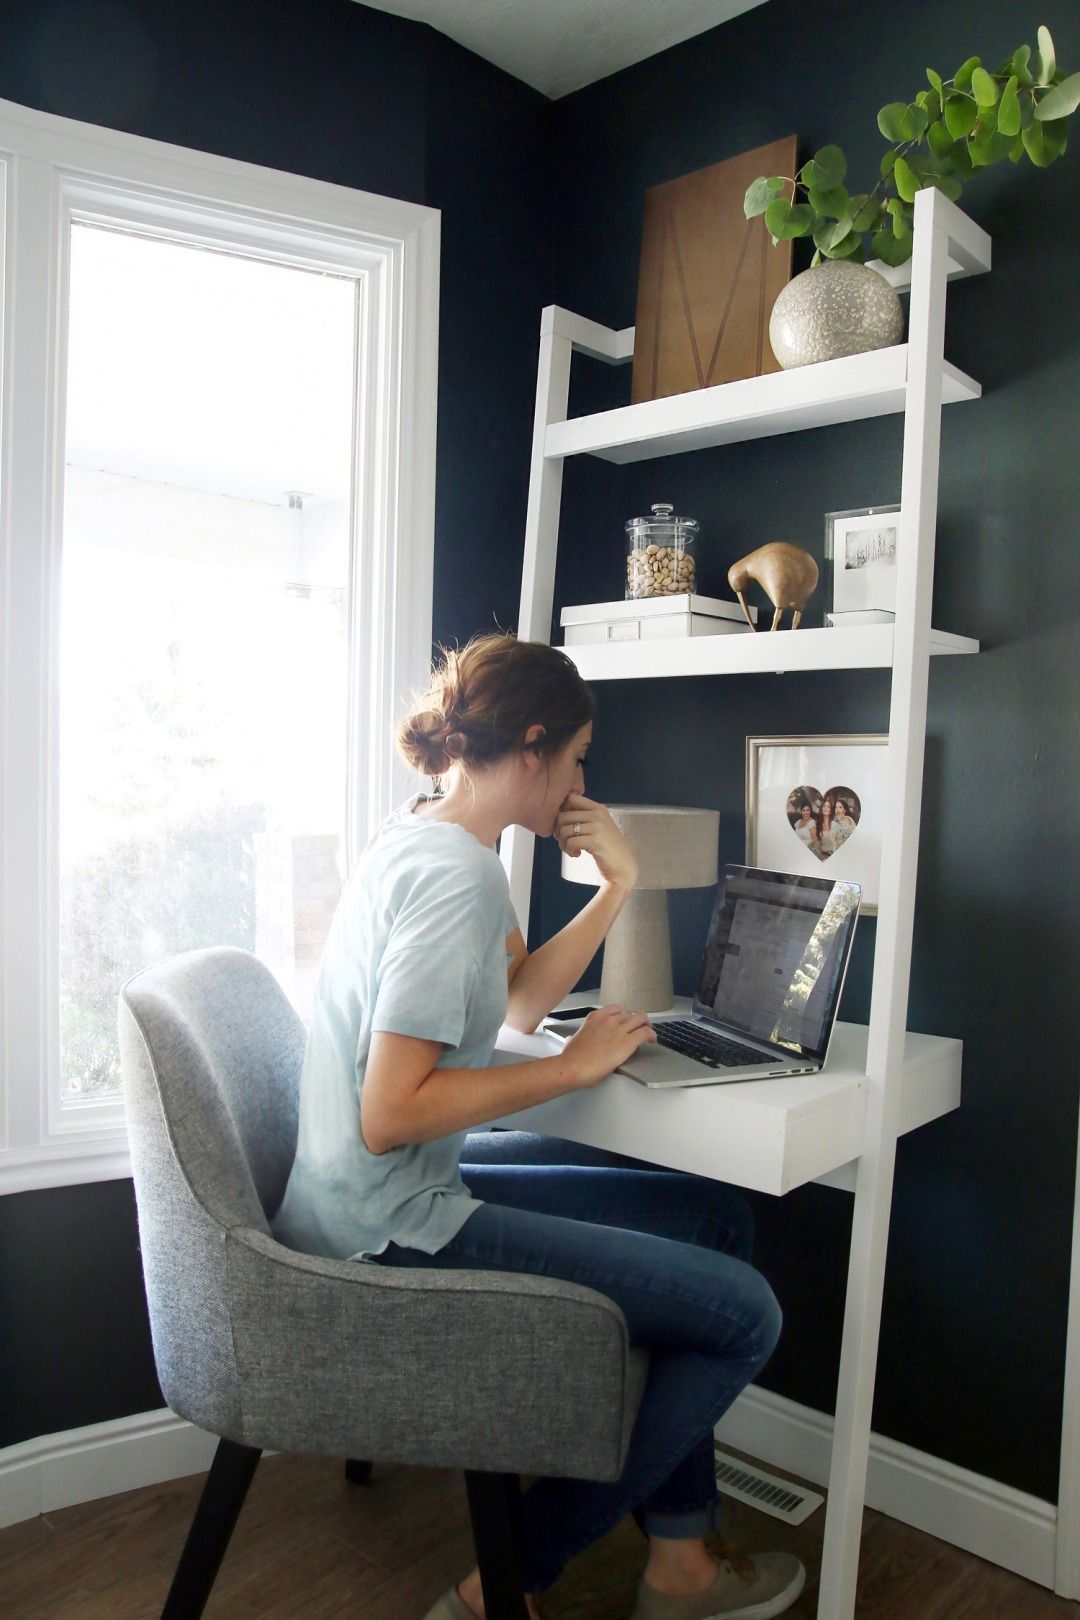 Create a stylish, productive little nook, even when space is tight, with our chic, modern home office ideas for small spaces from